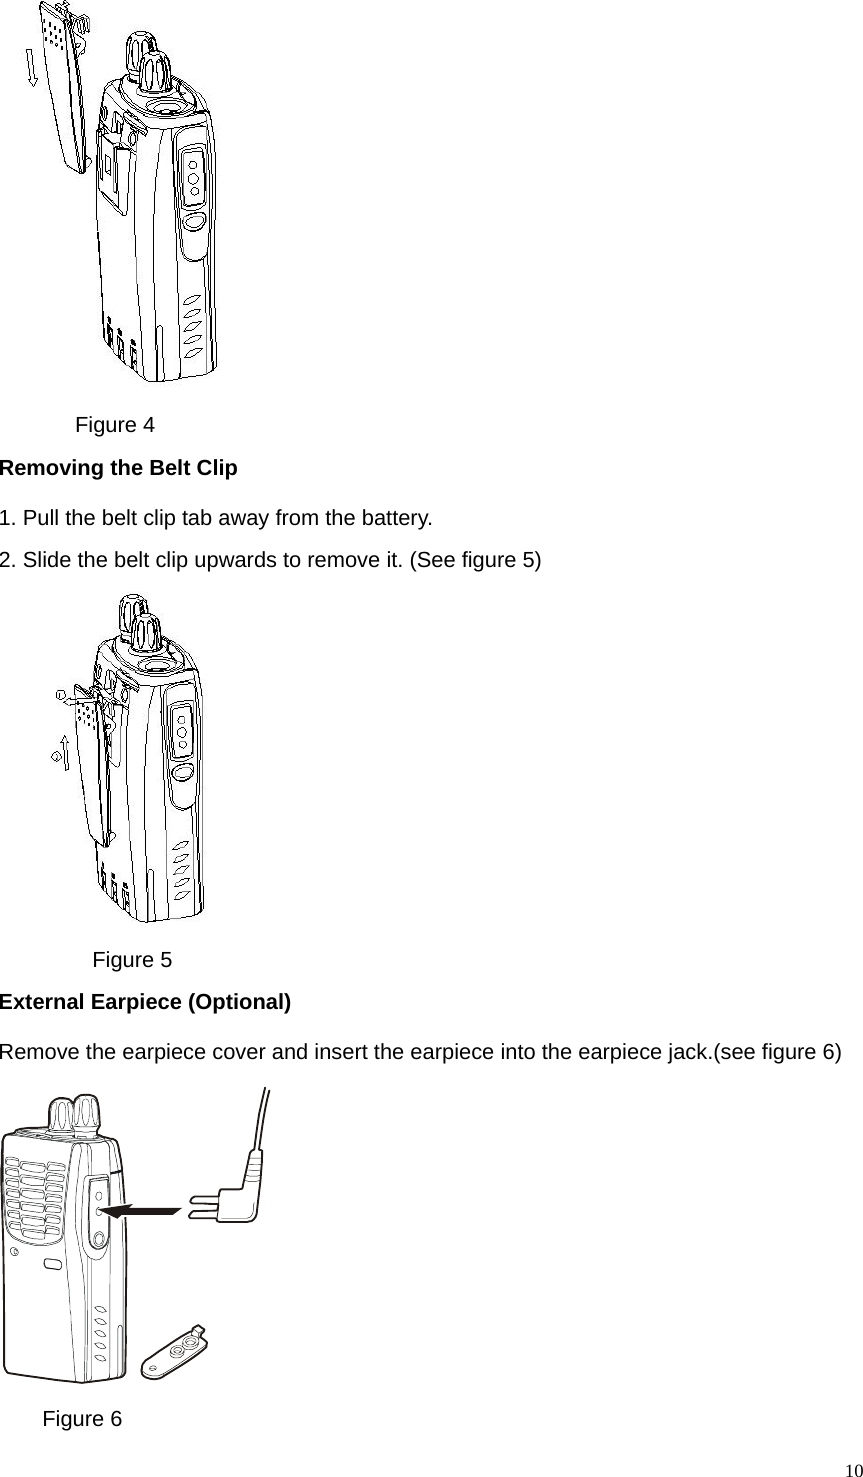   10      Figure 4 Removing the Belt Clip   1. Pull the belt clip tab away from the battery. 2. Slide the belt clip upwards to remove it. (See figure 5)       Figure 5 External Earpiece (Optional) Remove the earpiece cover and insert the earpiece into the earpiece jack.(see figure 6)      Figure 6 